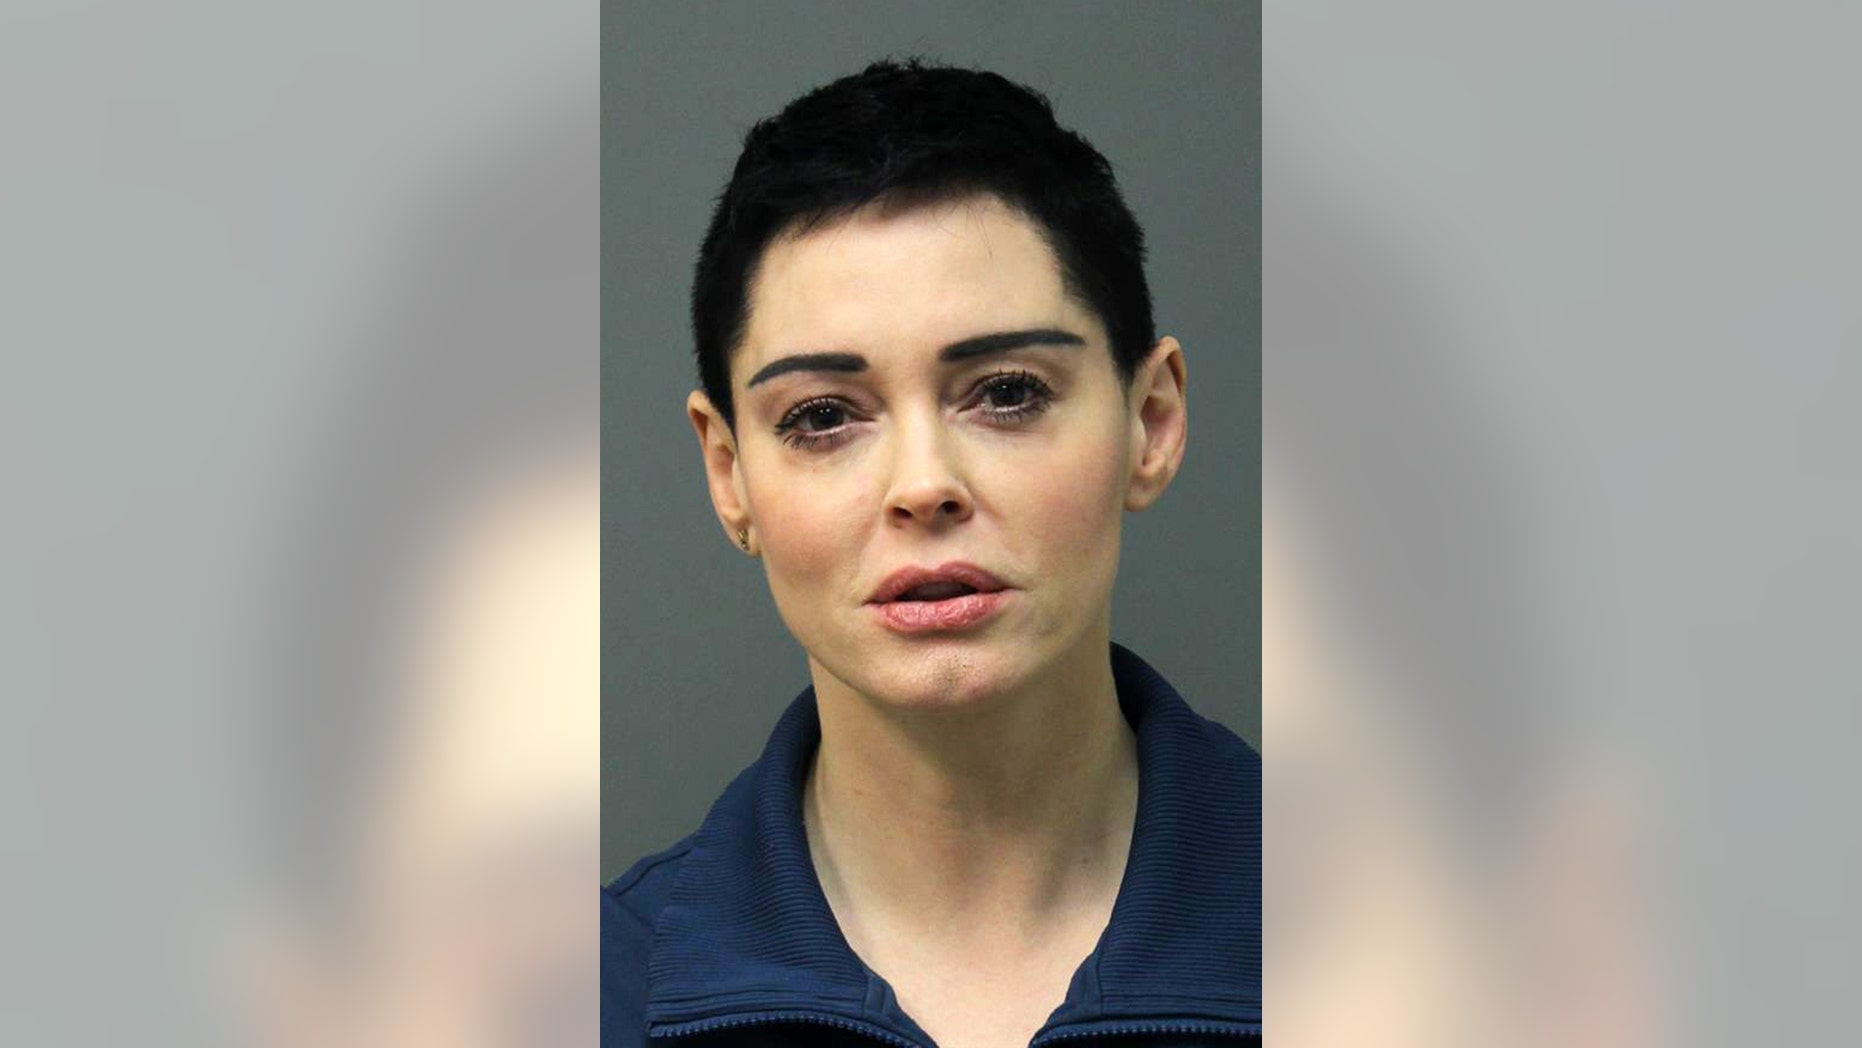 Rose Mcgowan Arrested For Felony Possession Of A Controlled Substance